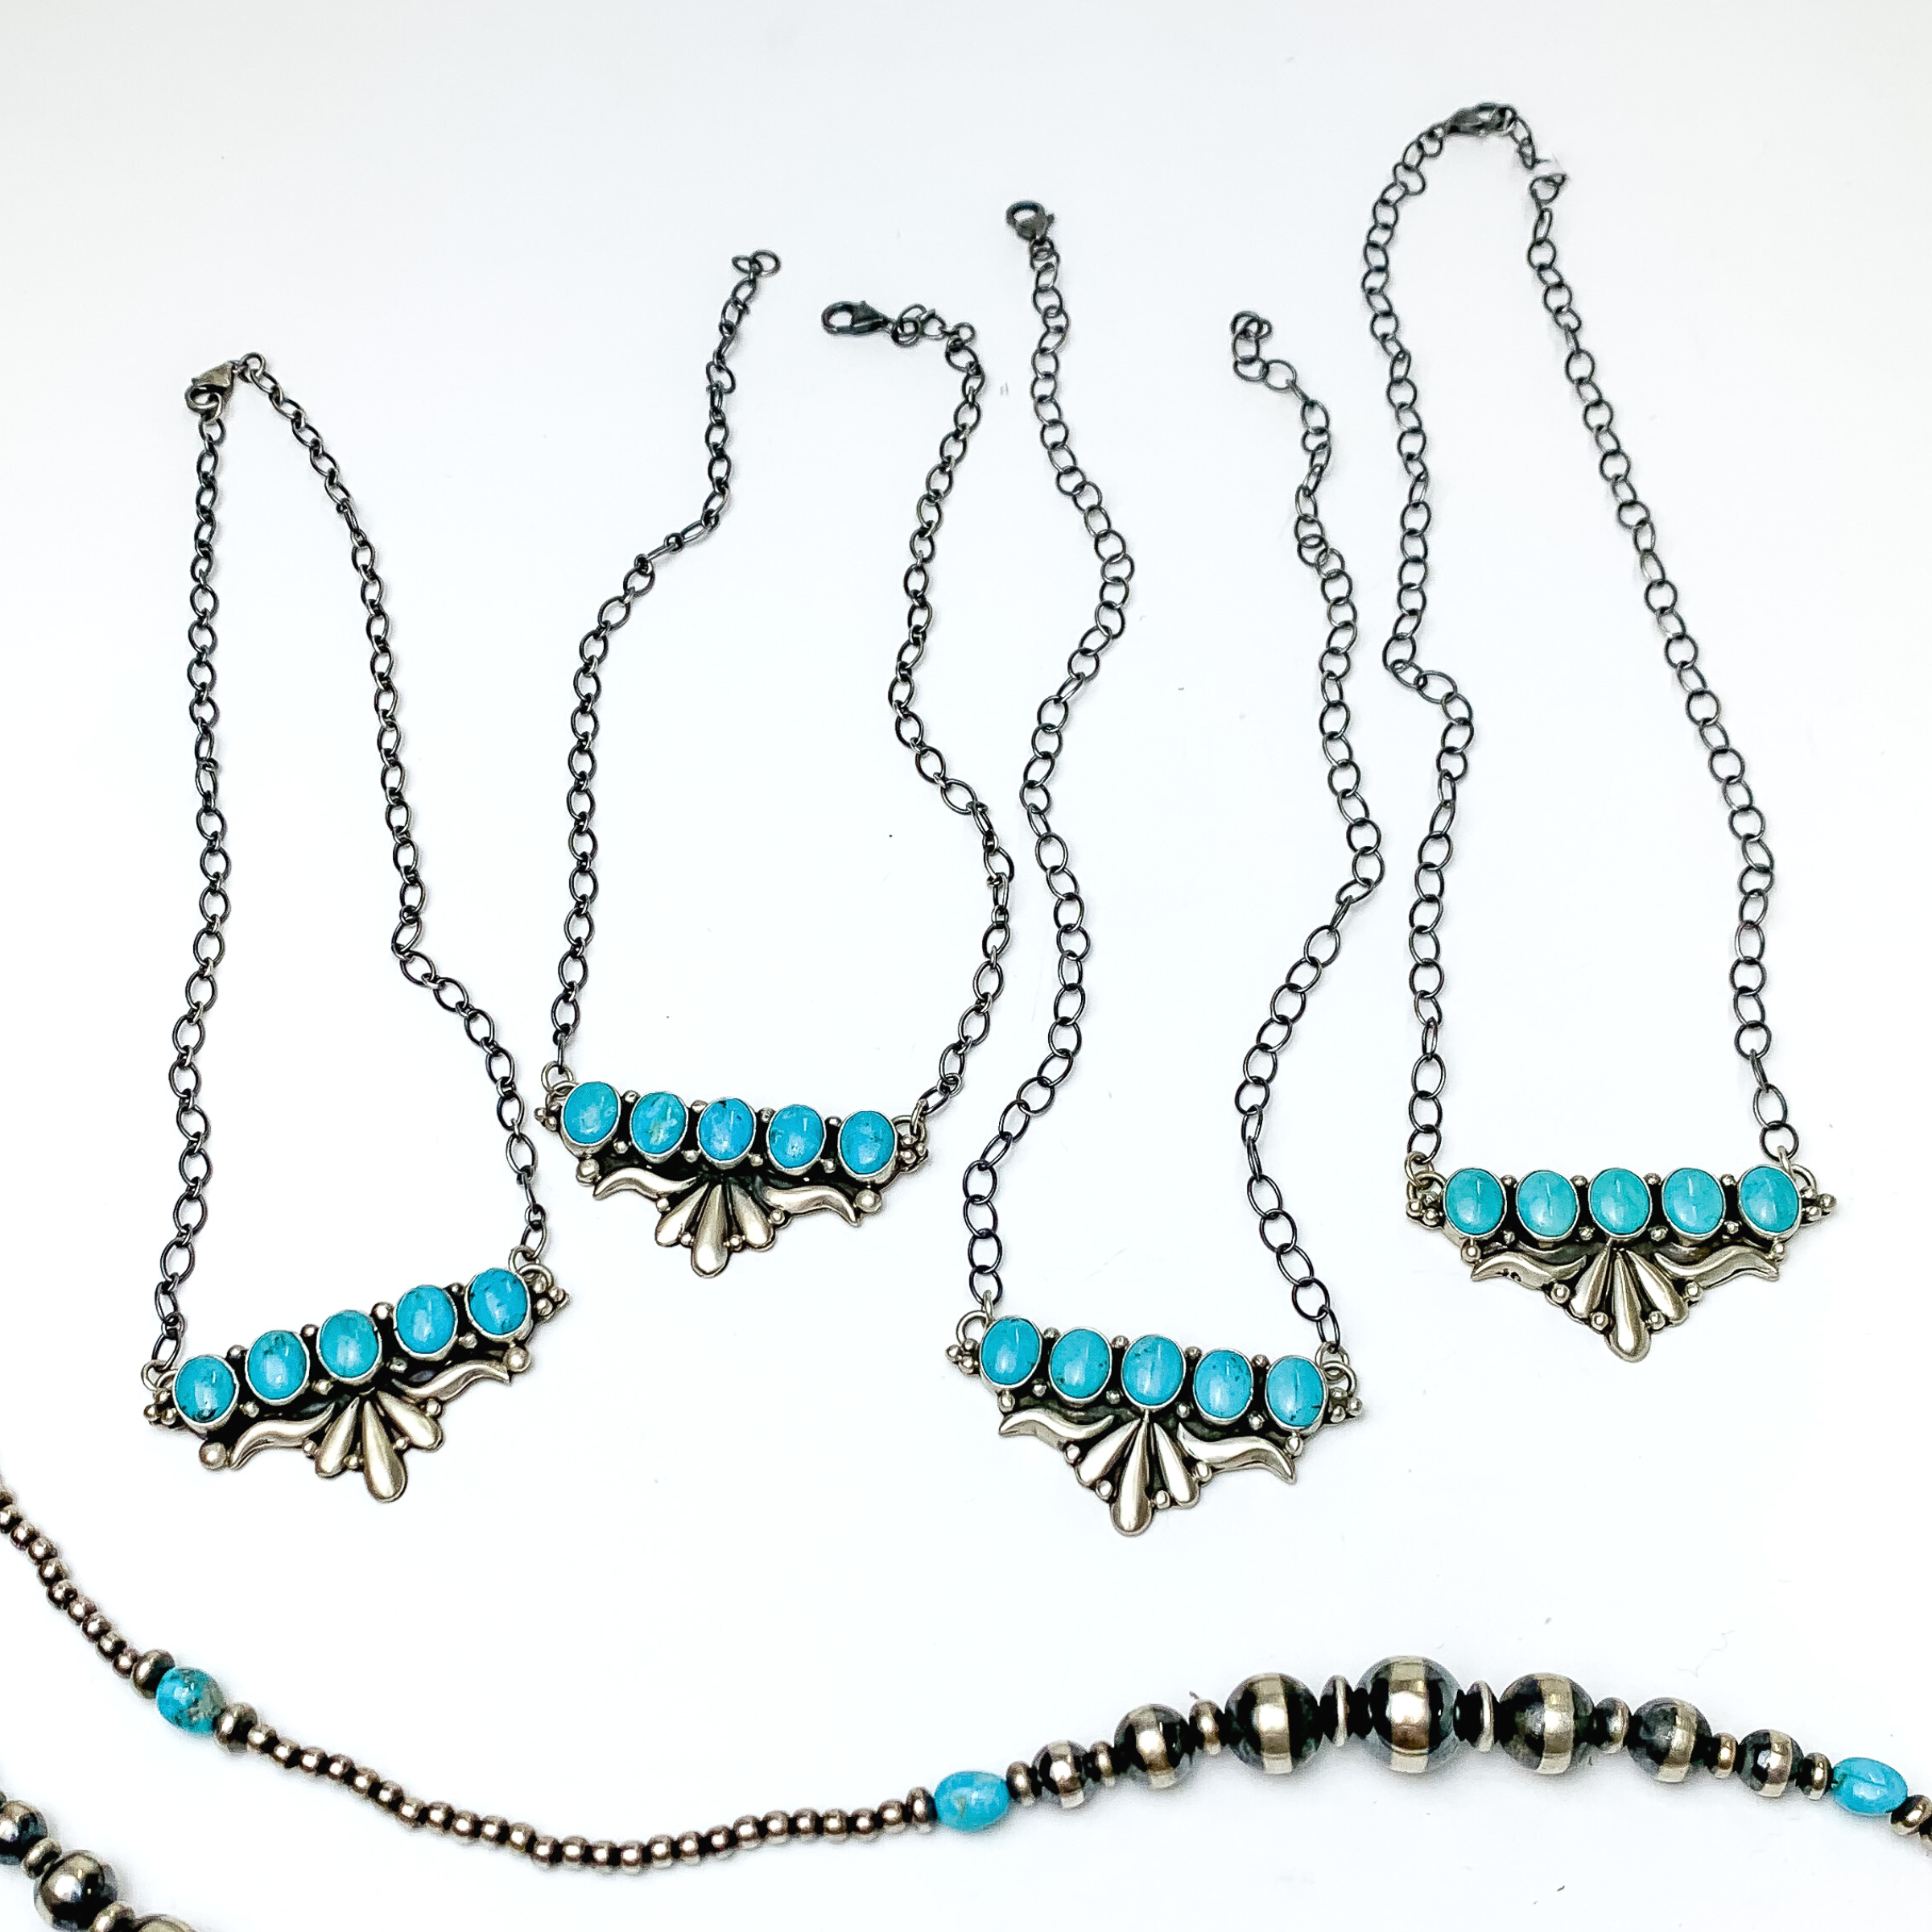 Four silver chain necklace with a silver and turquoise stone pendant. The pendant has some silver detailing and five turquoise stones. These necklaces are pictured on a white background with silver beads at the bottom of the picture.  